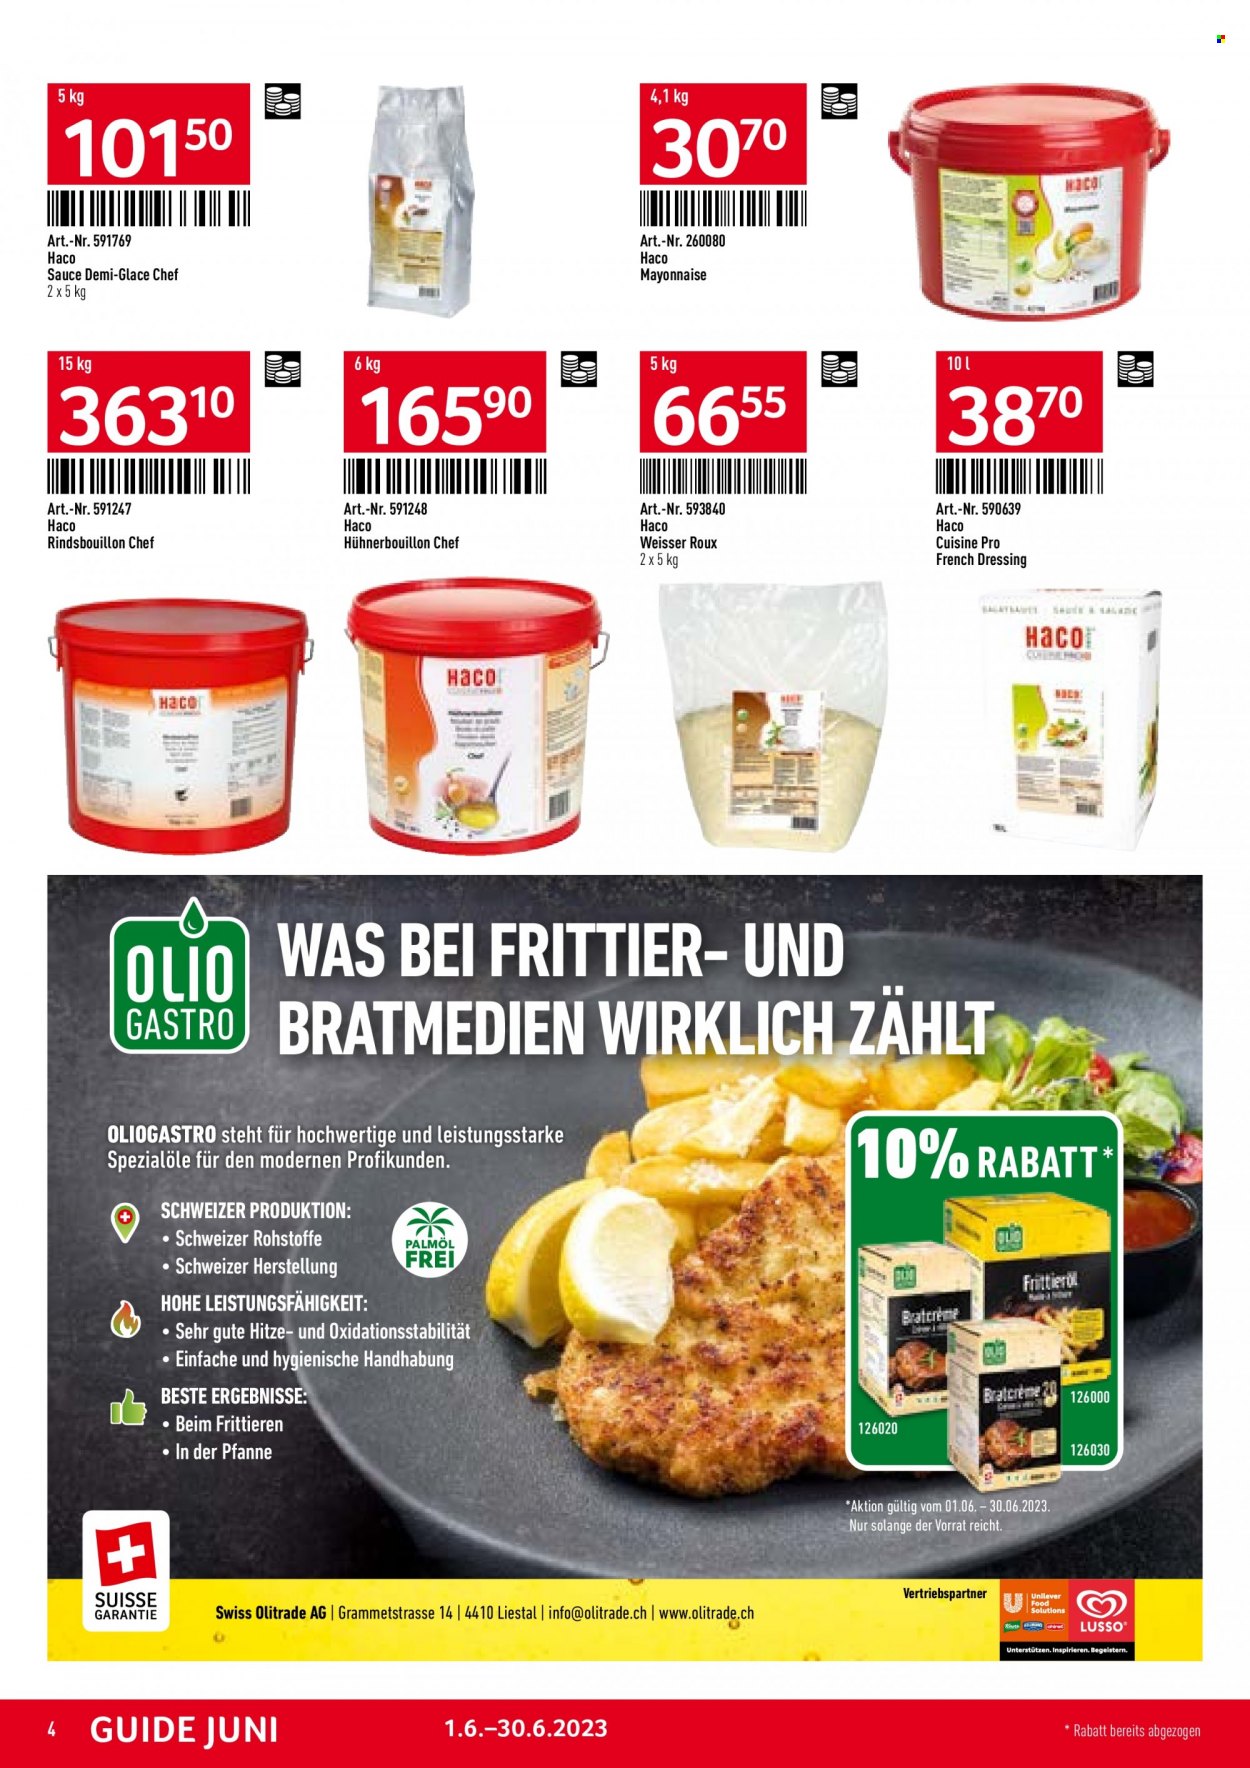 Catalogue TransGourmet - 1.6.2023 - 30.6.2023. Page 4.